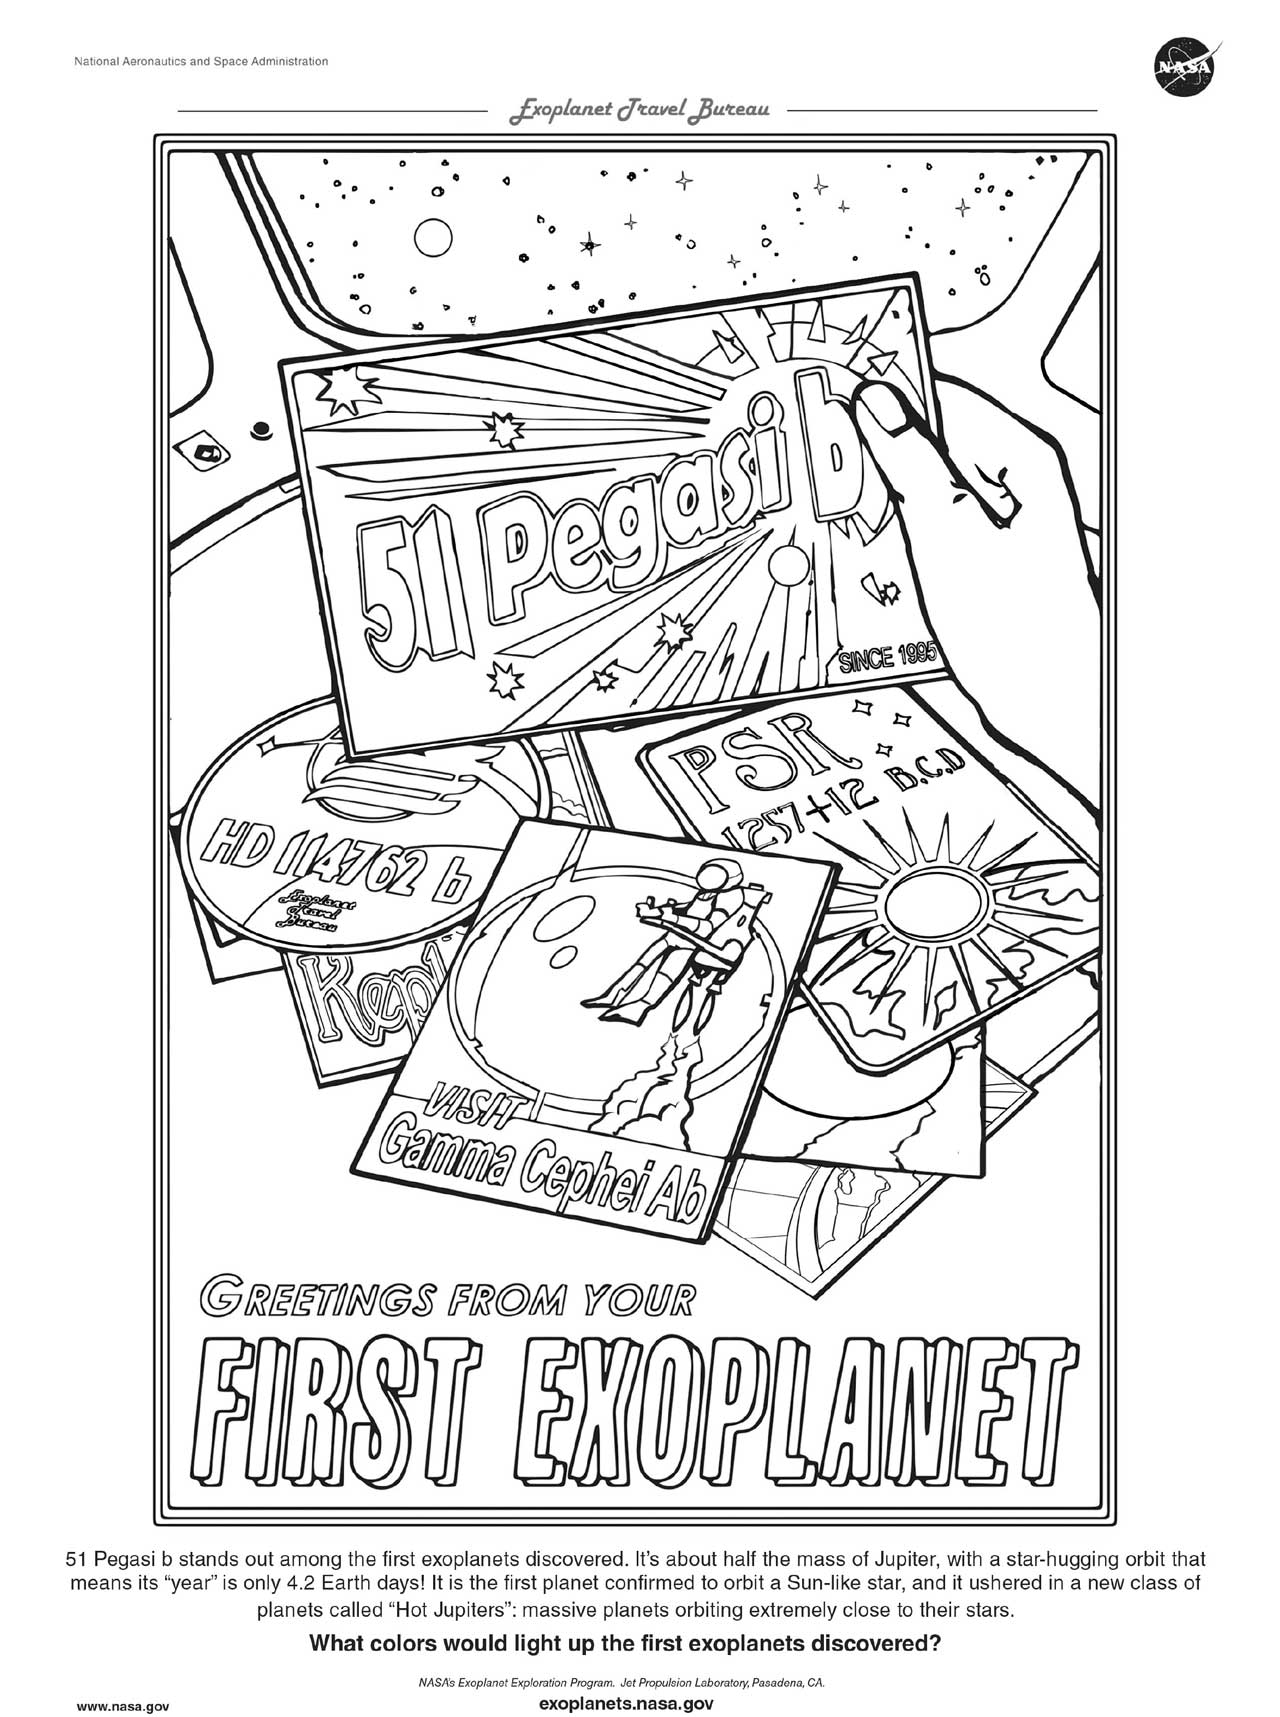 Add your touch to the coloring page for 51 Pegasi b based on our popular Exoplanet Travel Bureau poster that shows various post cards for first exoplanets discovered.